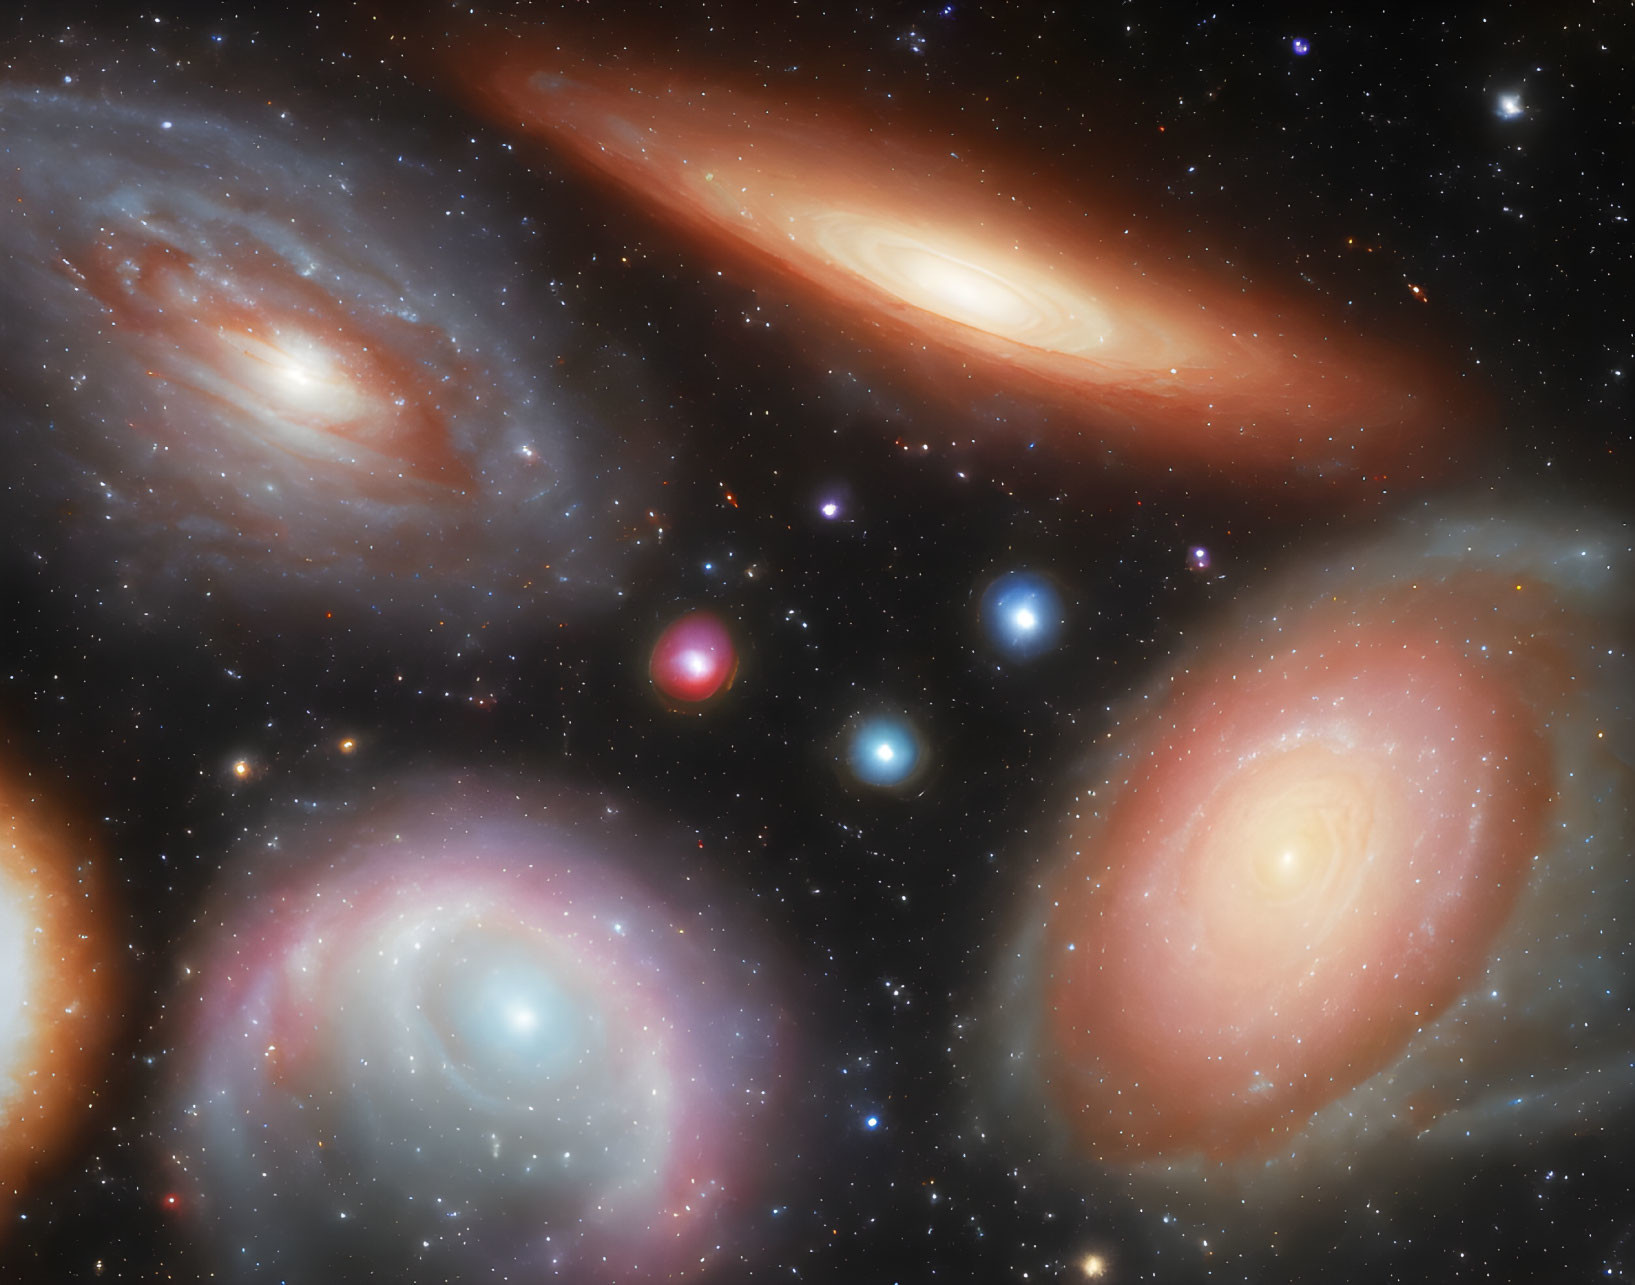 Multiple Galaxies with Spiral Arms and Glowing Centers in Cosmic Scene